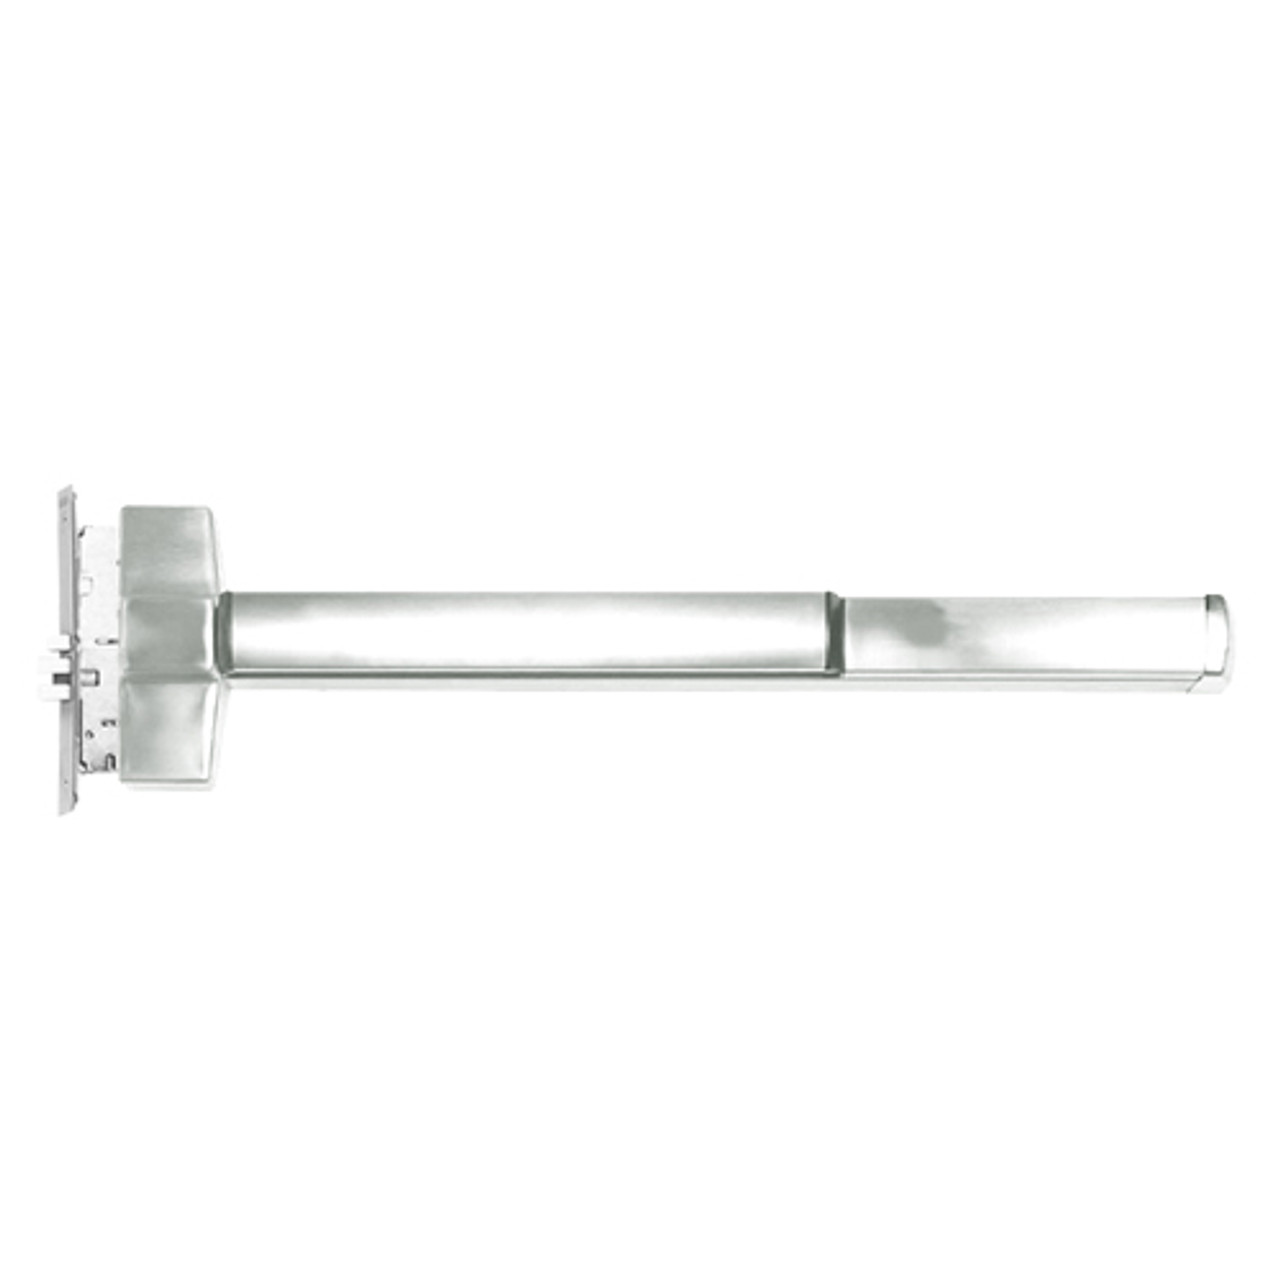 ED5657AL-618-LHR Corbin ED5600 Series Fire Rated Mortise Exit Device in Bright Nickel Finish